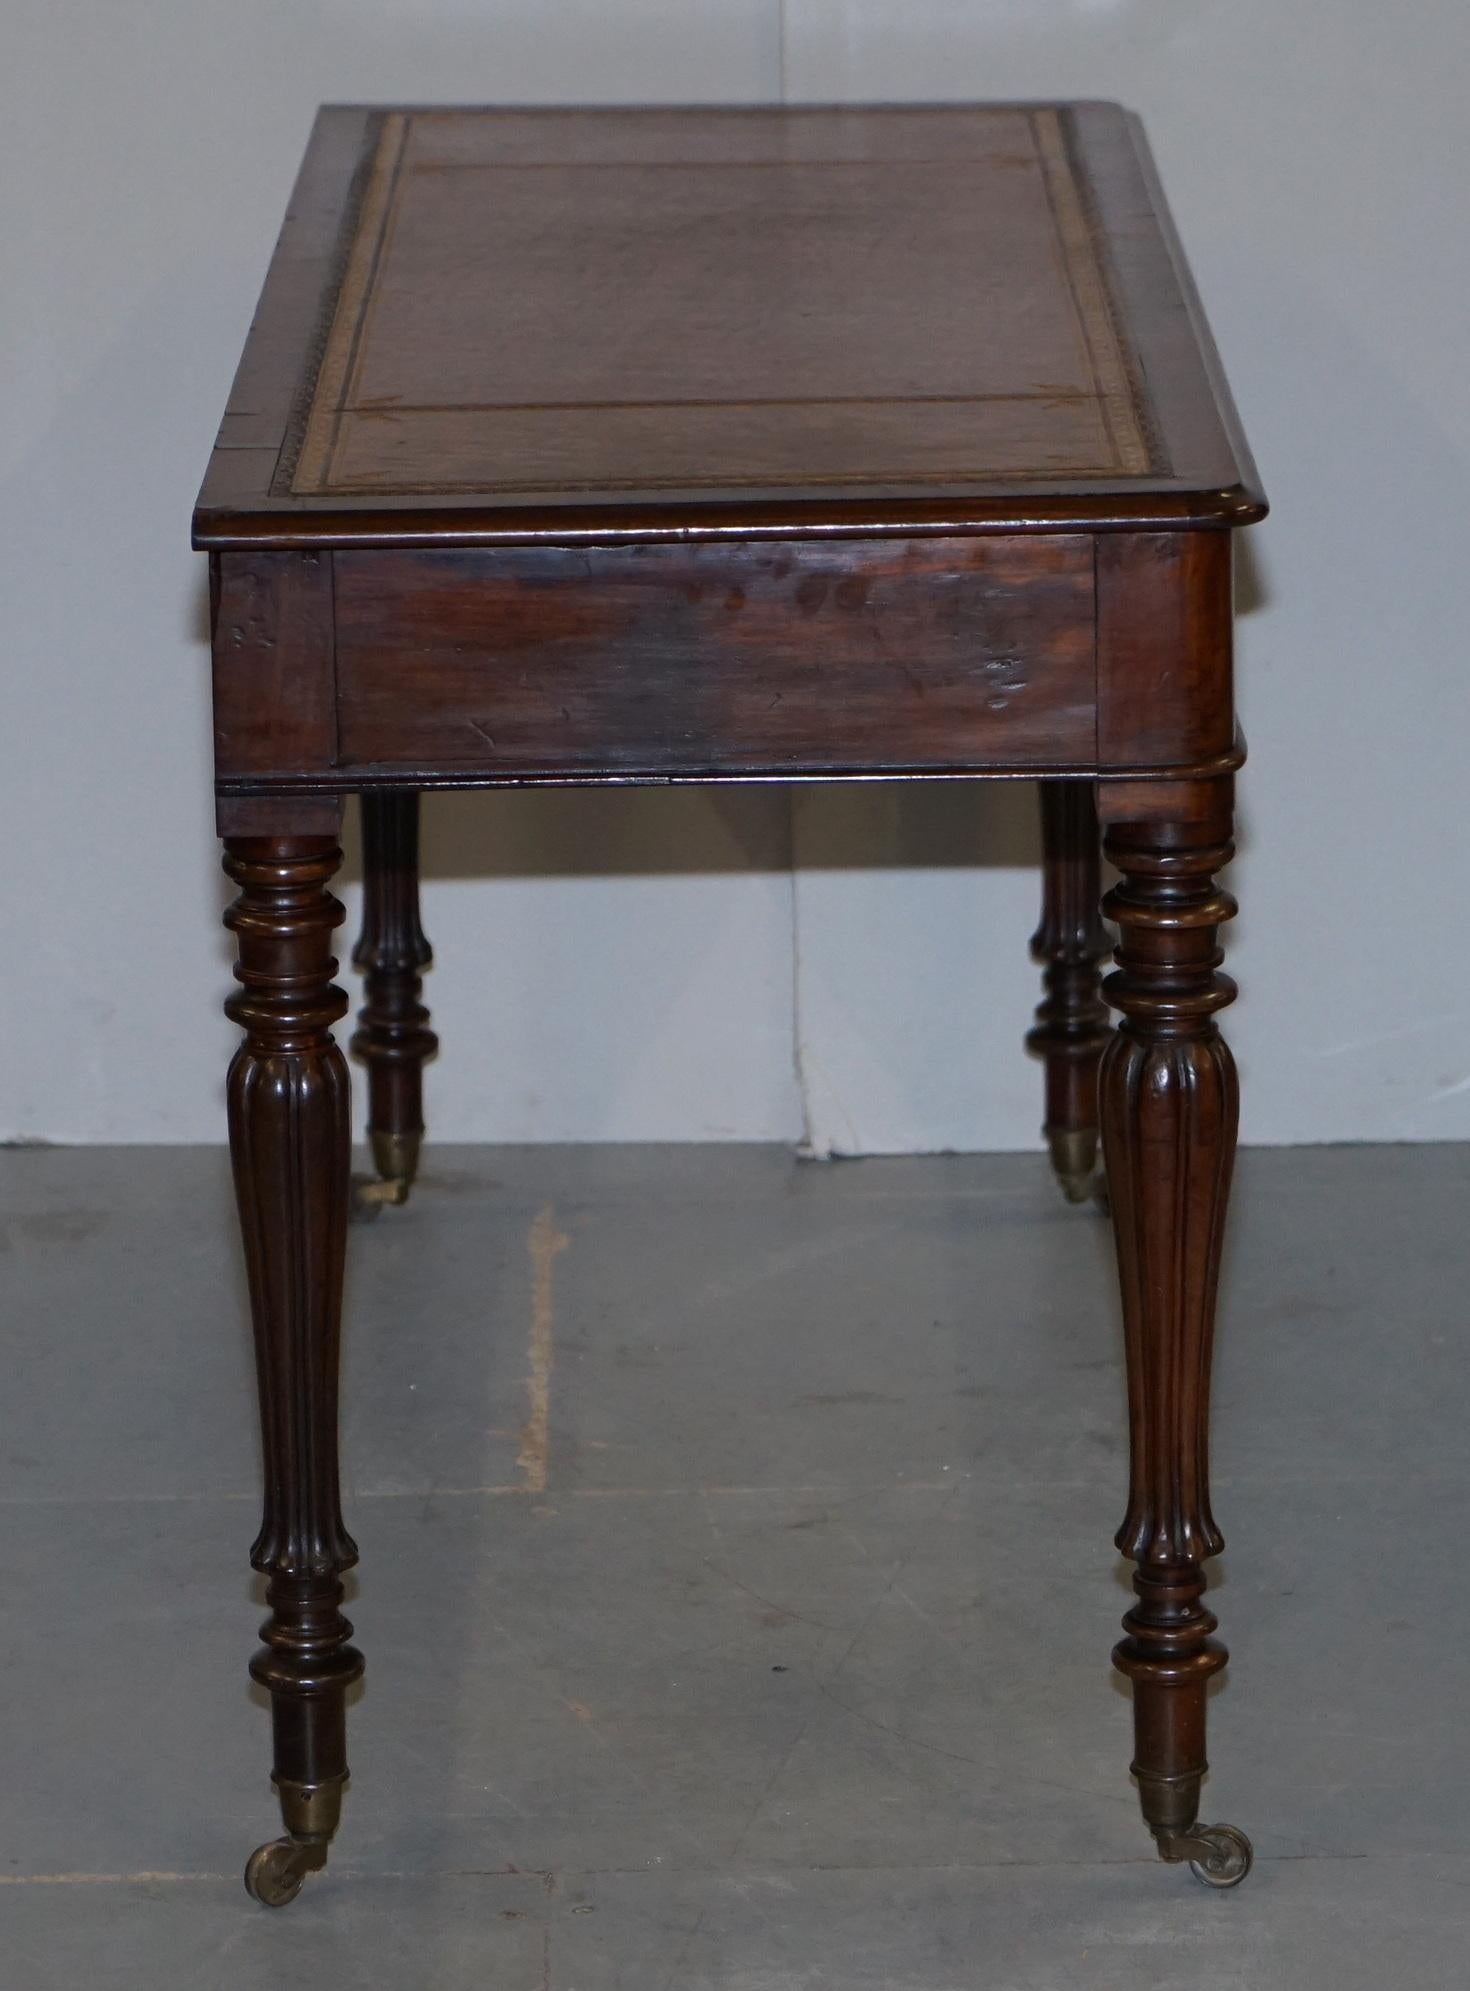 Stunning Victorian Library Writing Table or Desk Brown Leather Top Gillows Legs 9